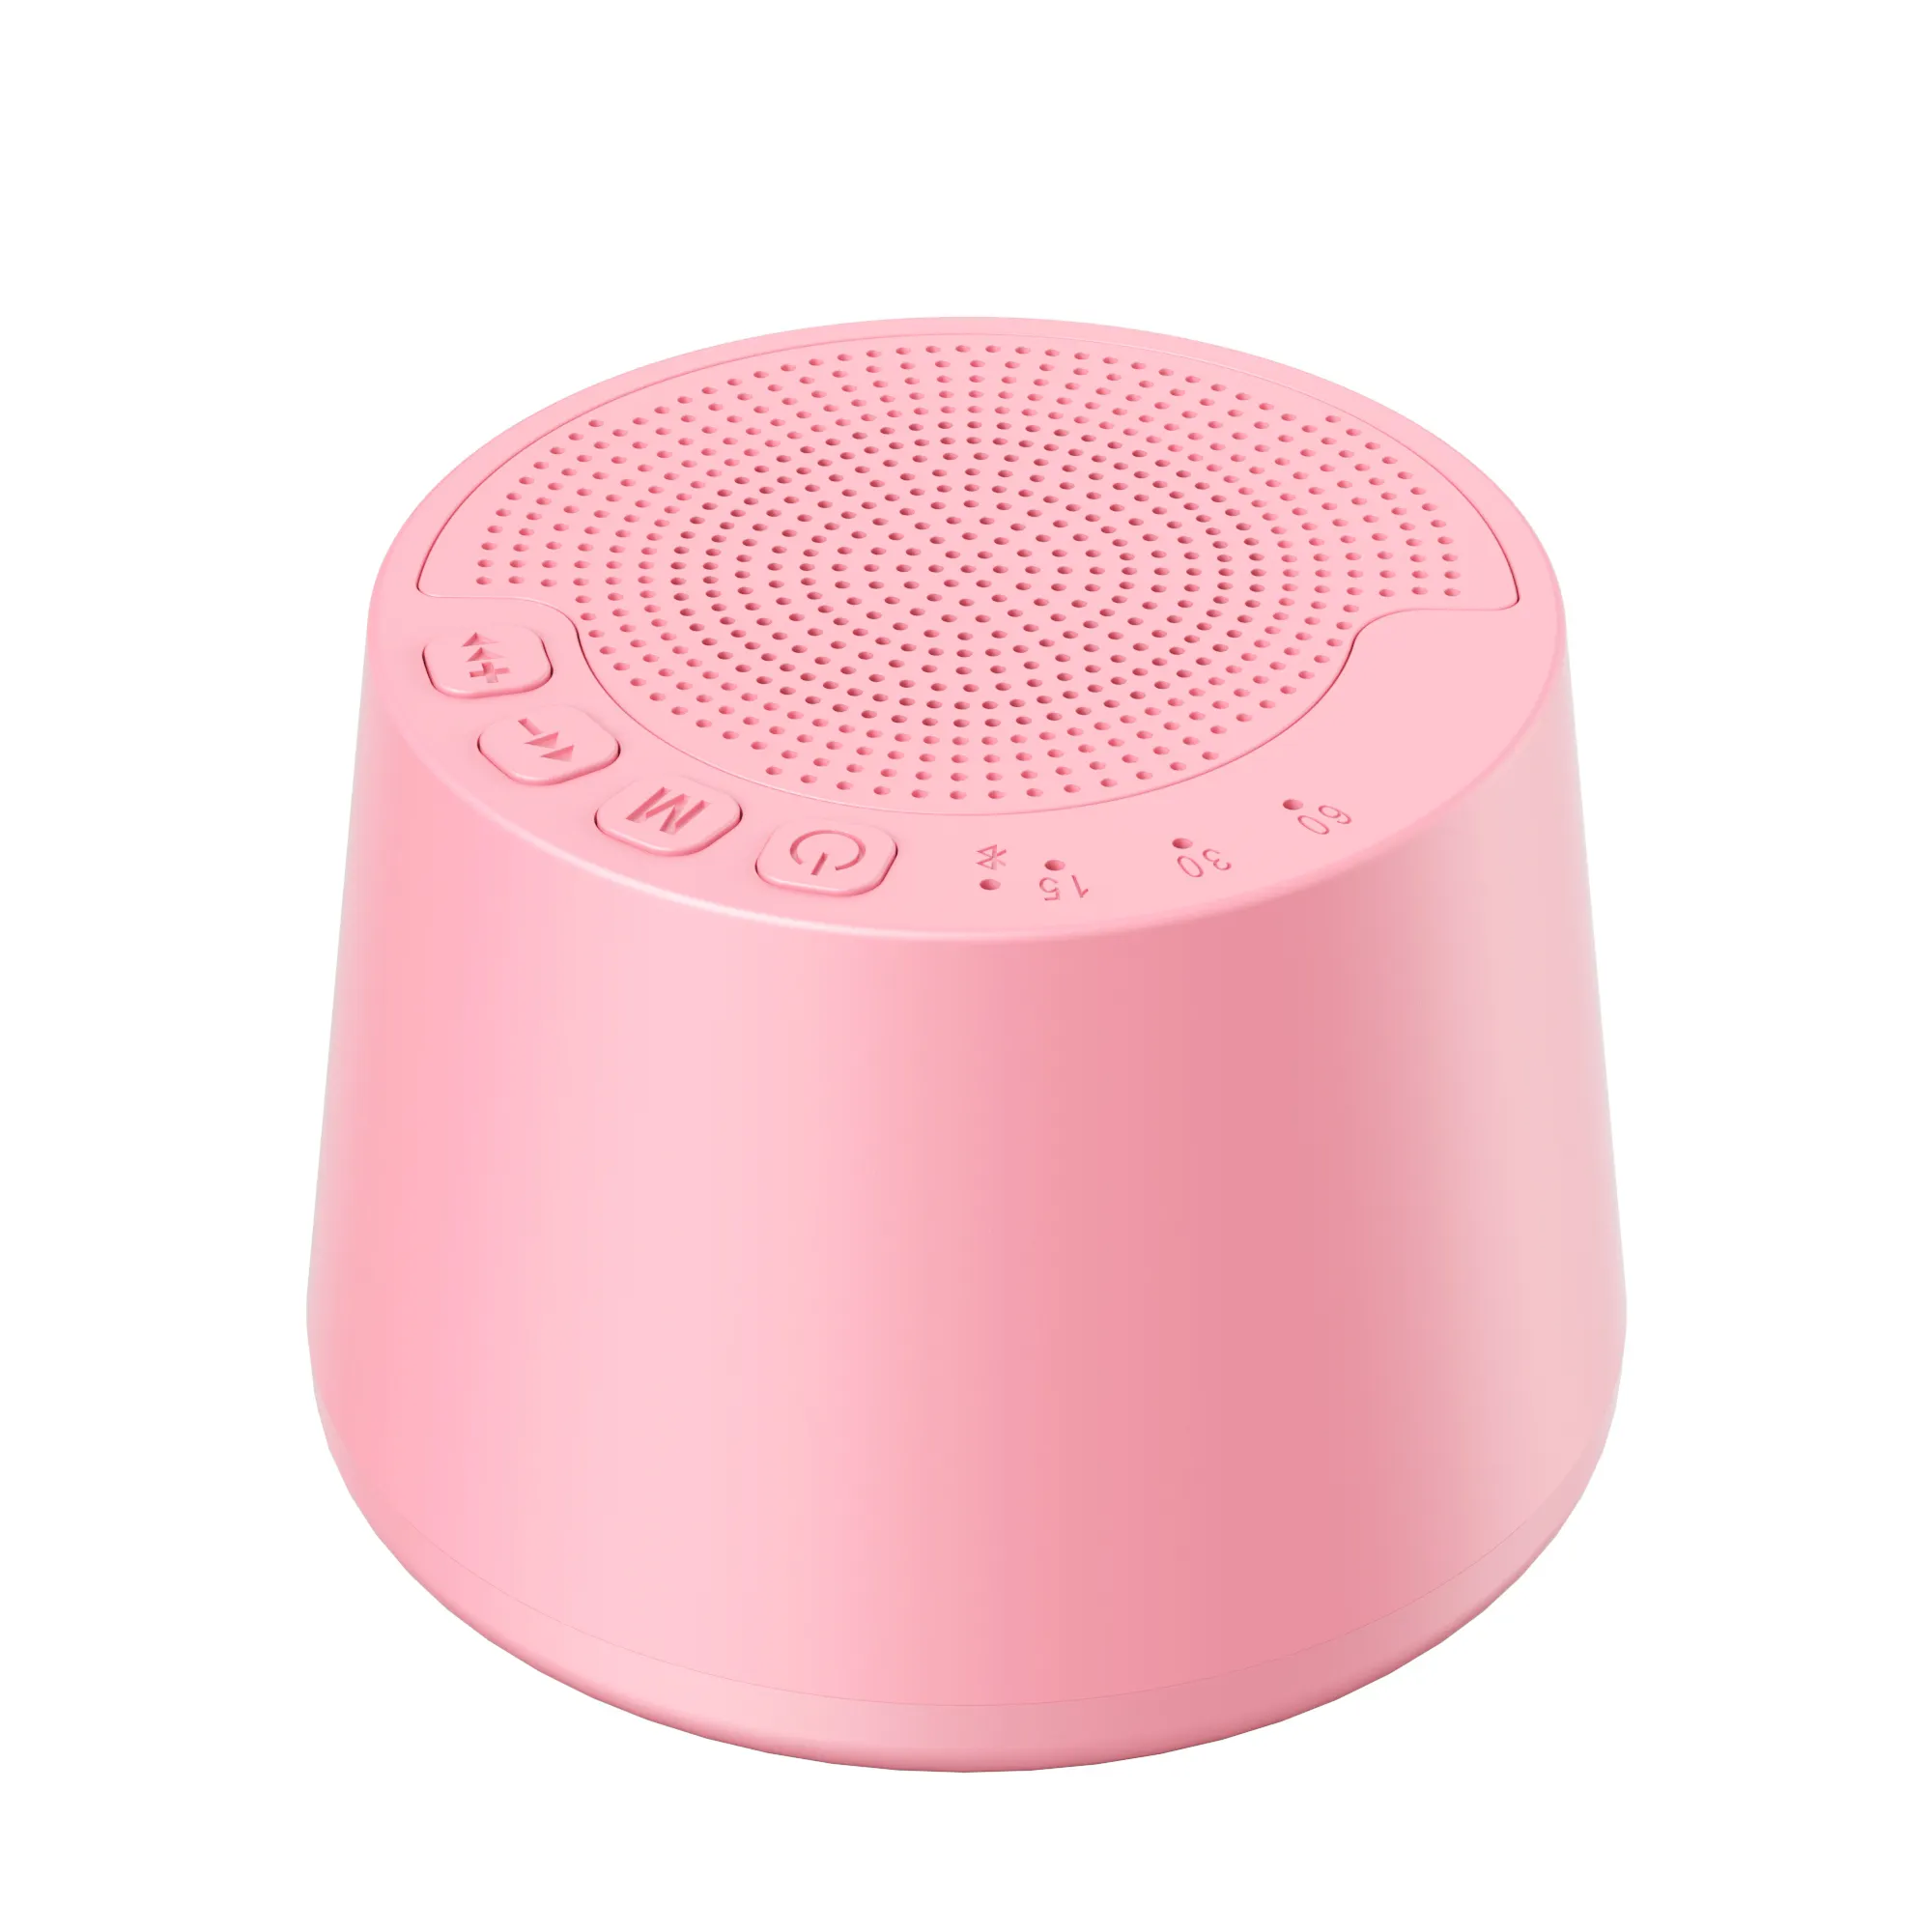 White Noise Machine Portable White Noise Machine For Travel Soothing Natural Sounds With Volume Control Compact Sleep Therapy